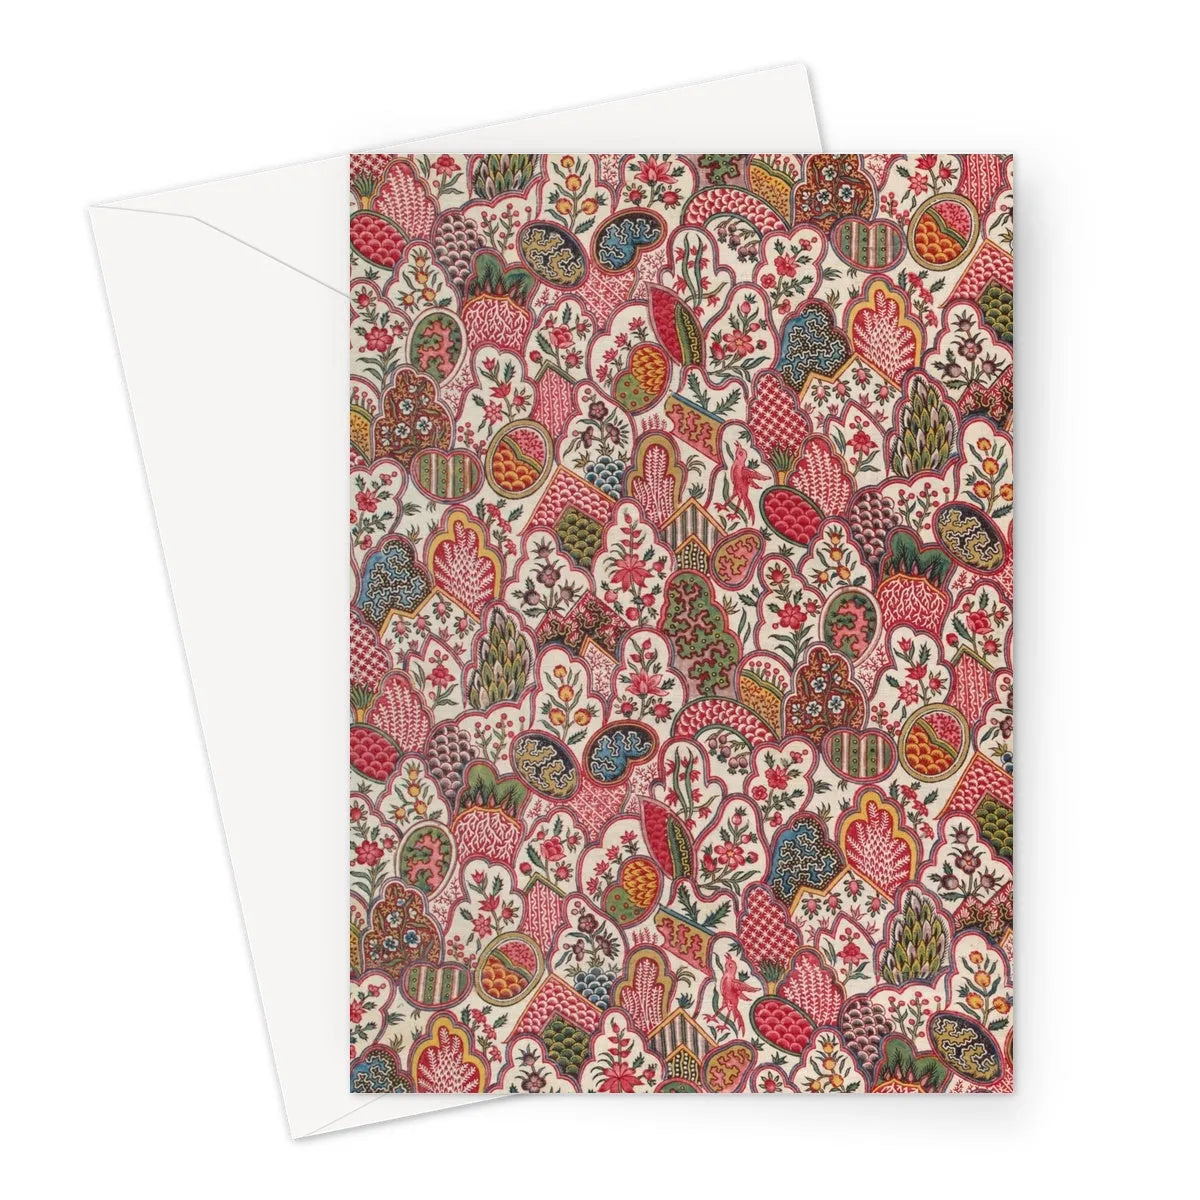 Vintage Floral Pattern Fabric Greeting Card - A5 Portrait / 1 Card - Greeting & Note Cards - Aesthetic Art